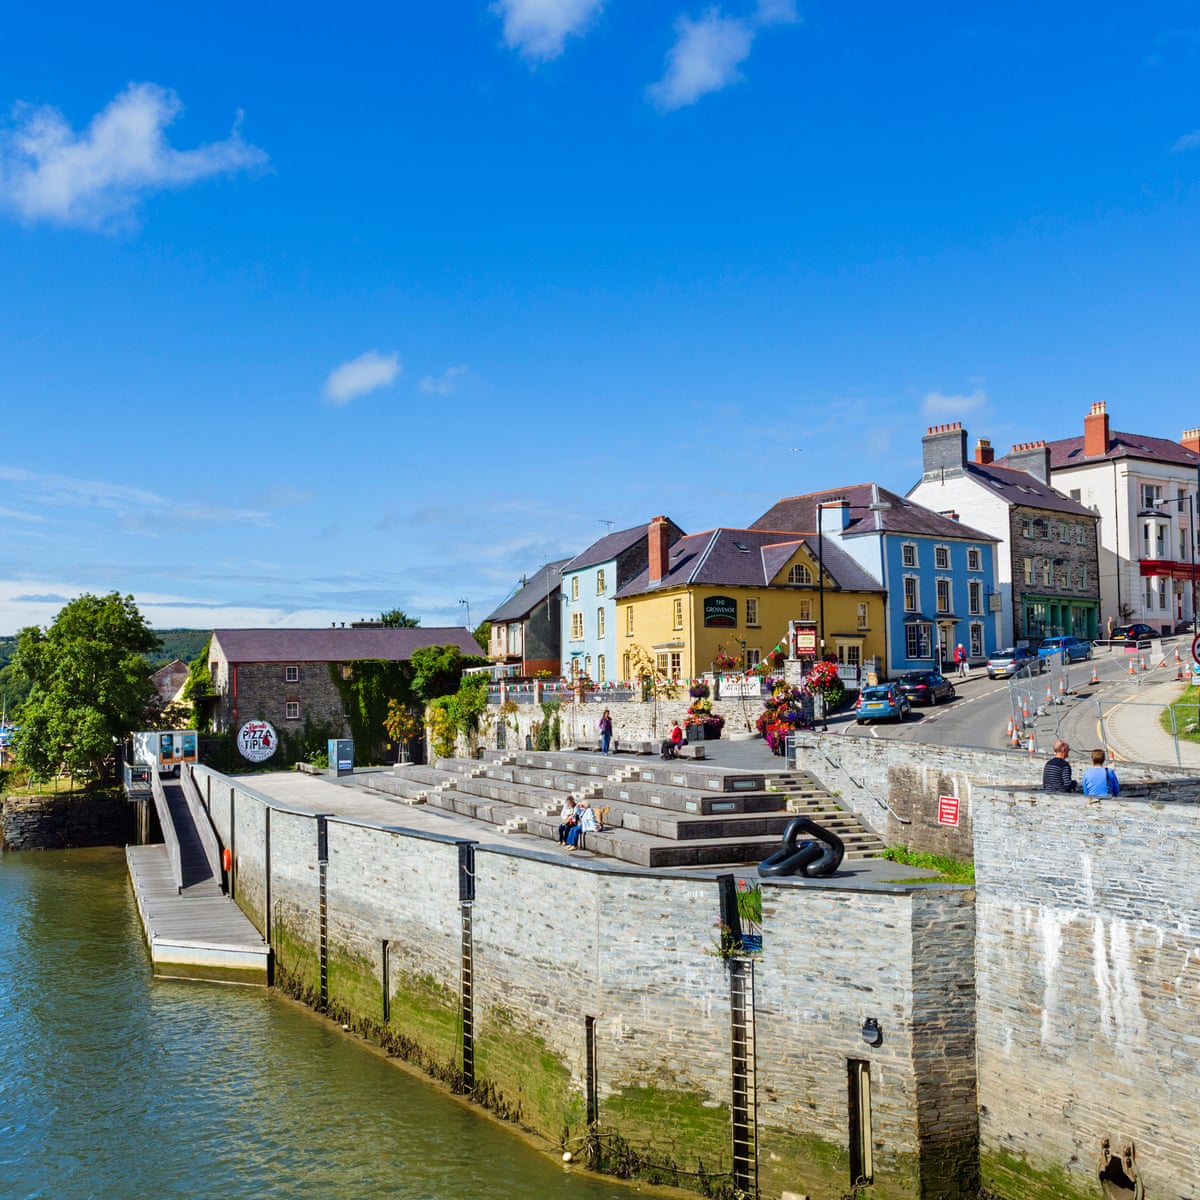 Let's move to Cardigan, Ceredigion: all bushy-tailed and bustling | Property | The Guardian